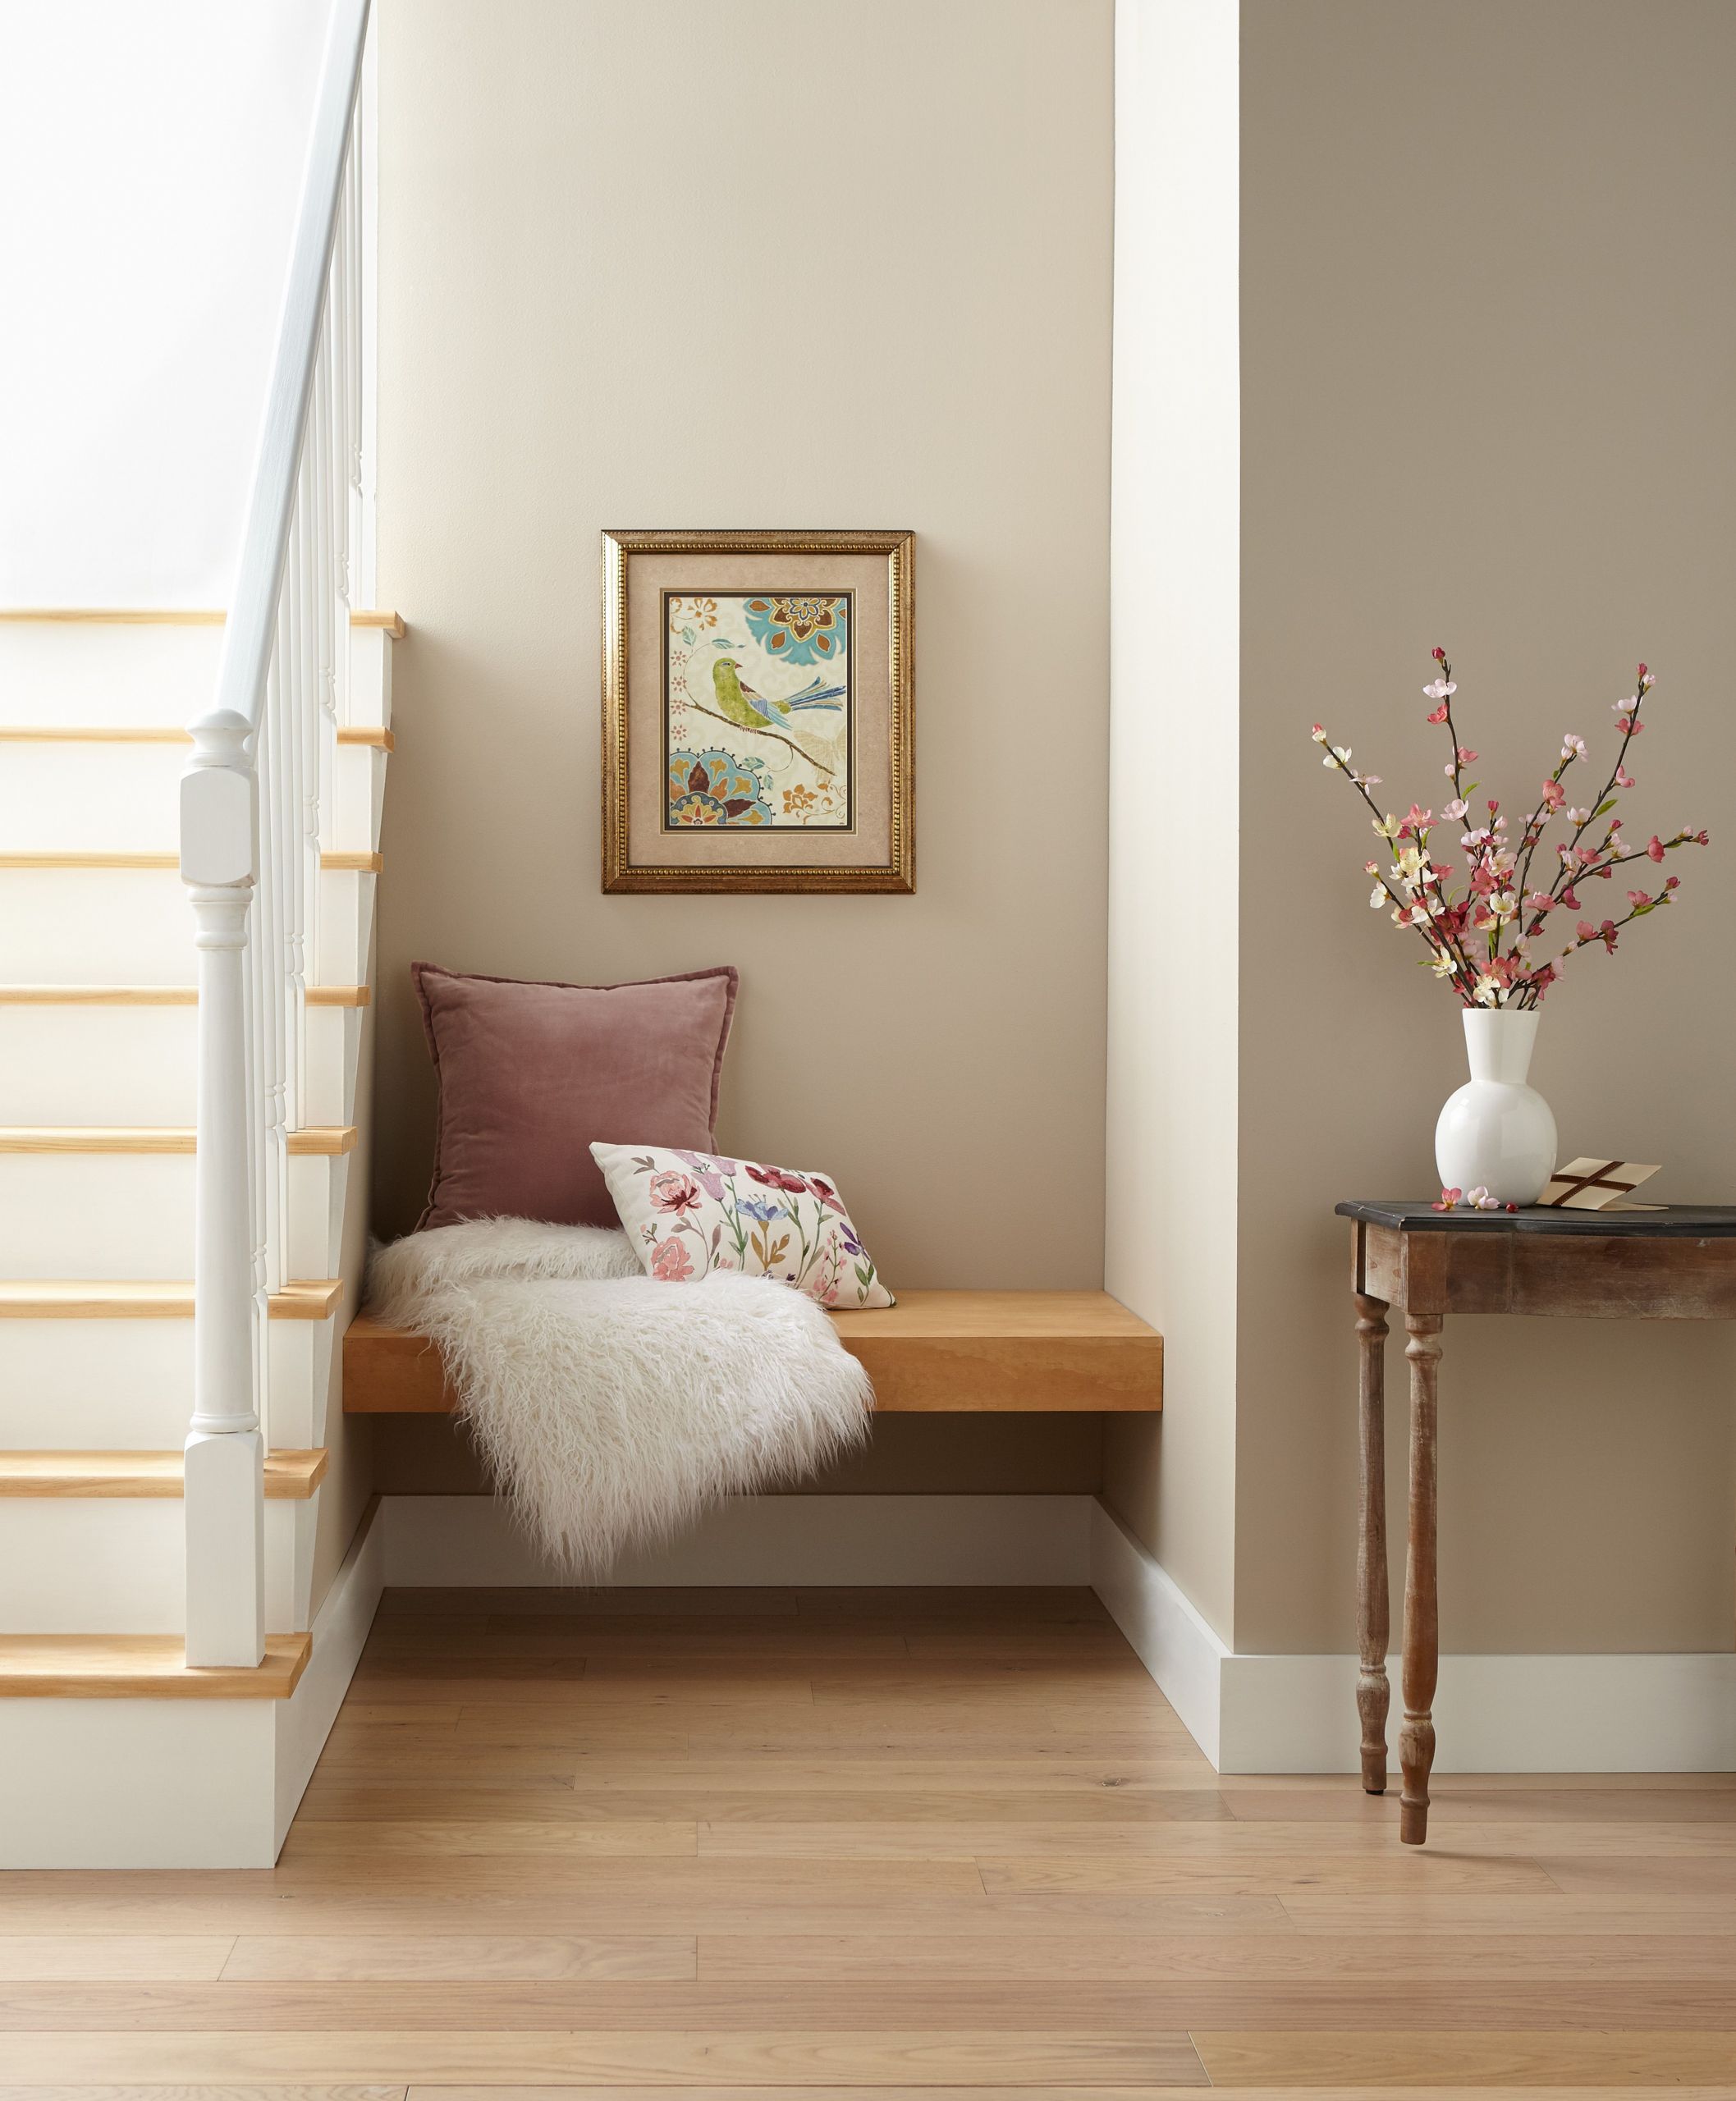 Living Room Color Schemes 2020
 2020 Paint Color Trends According to Behr